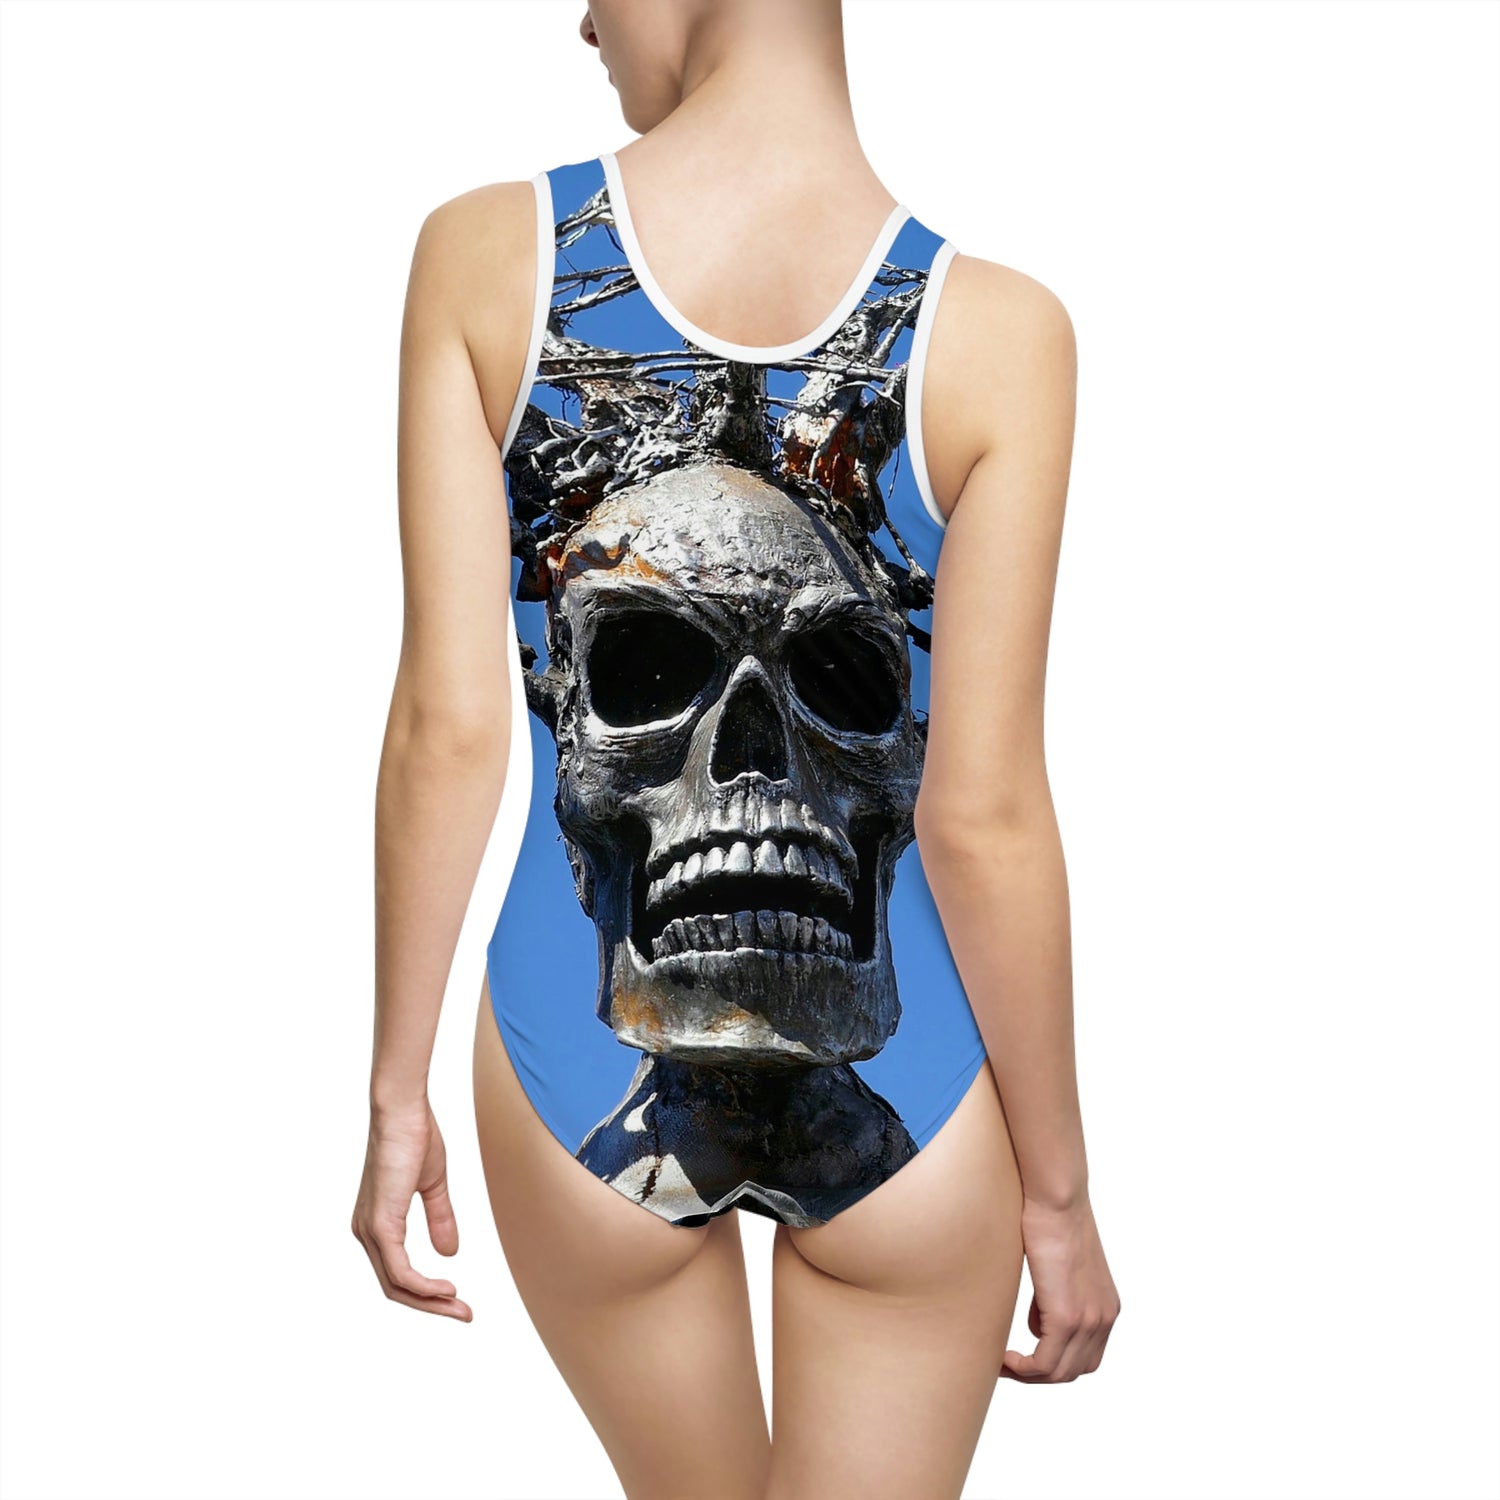 Skull Warrior Stare - Women's Classic One-Piece Swimsuit - Fry1Productions